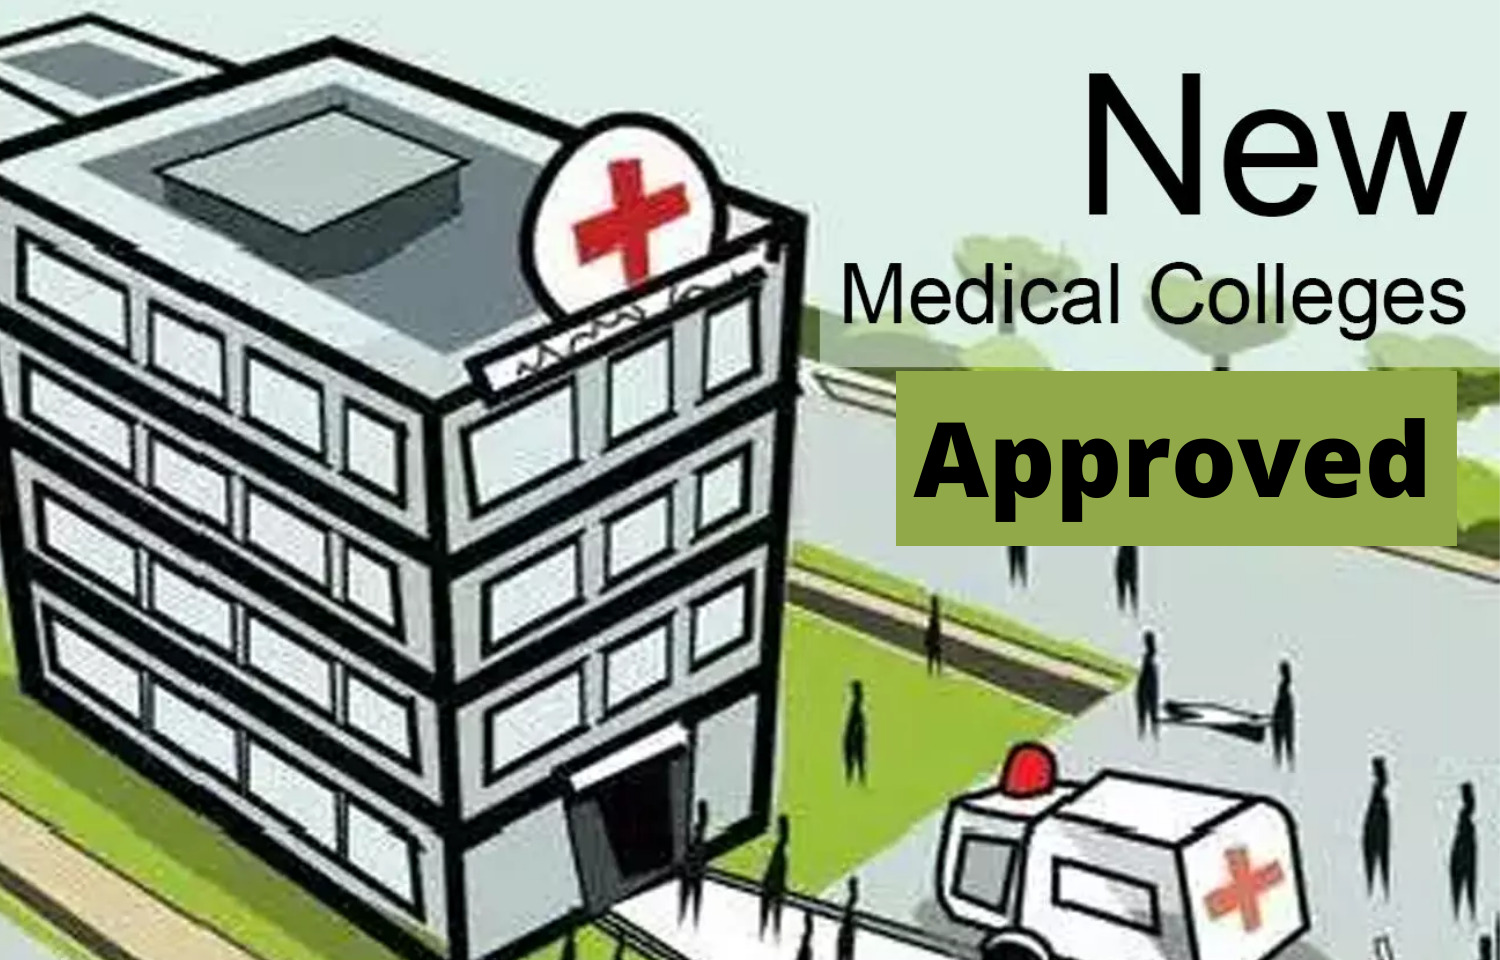 Admissions into Eight New Medical Colleges in Telangana from Next Year